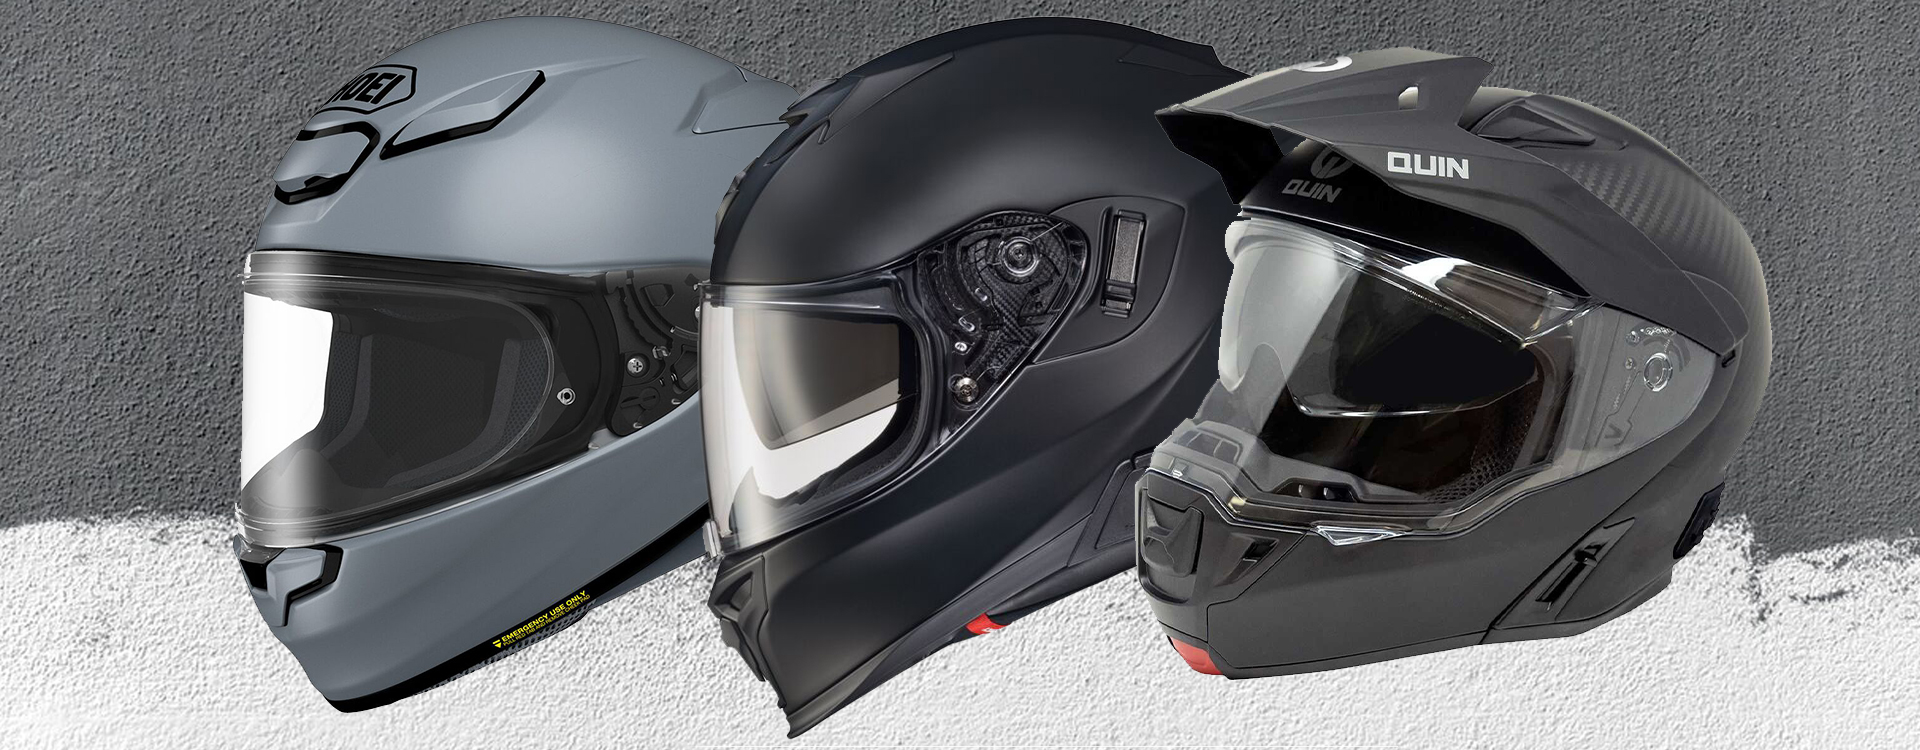 The Best Helmet Models Newly Introduced for 2021